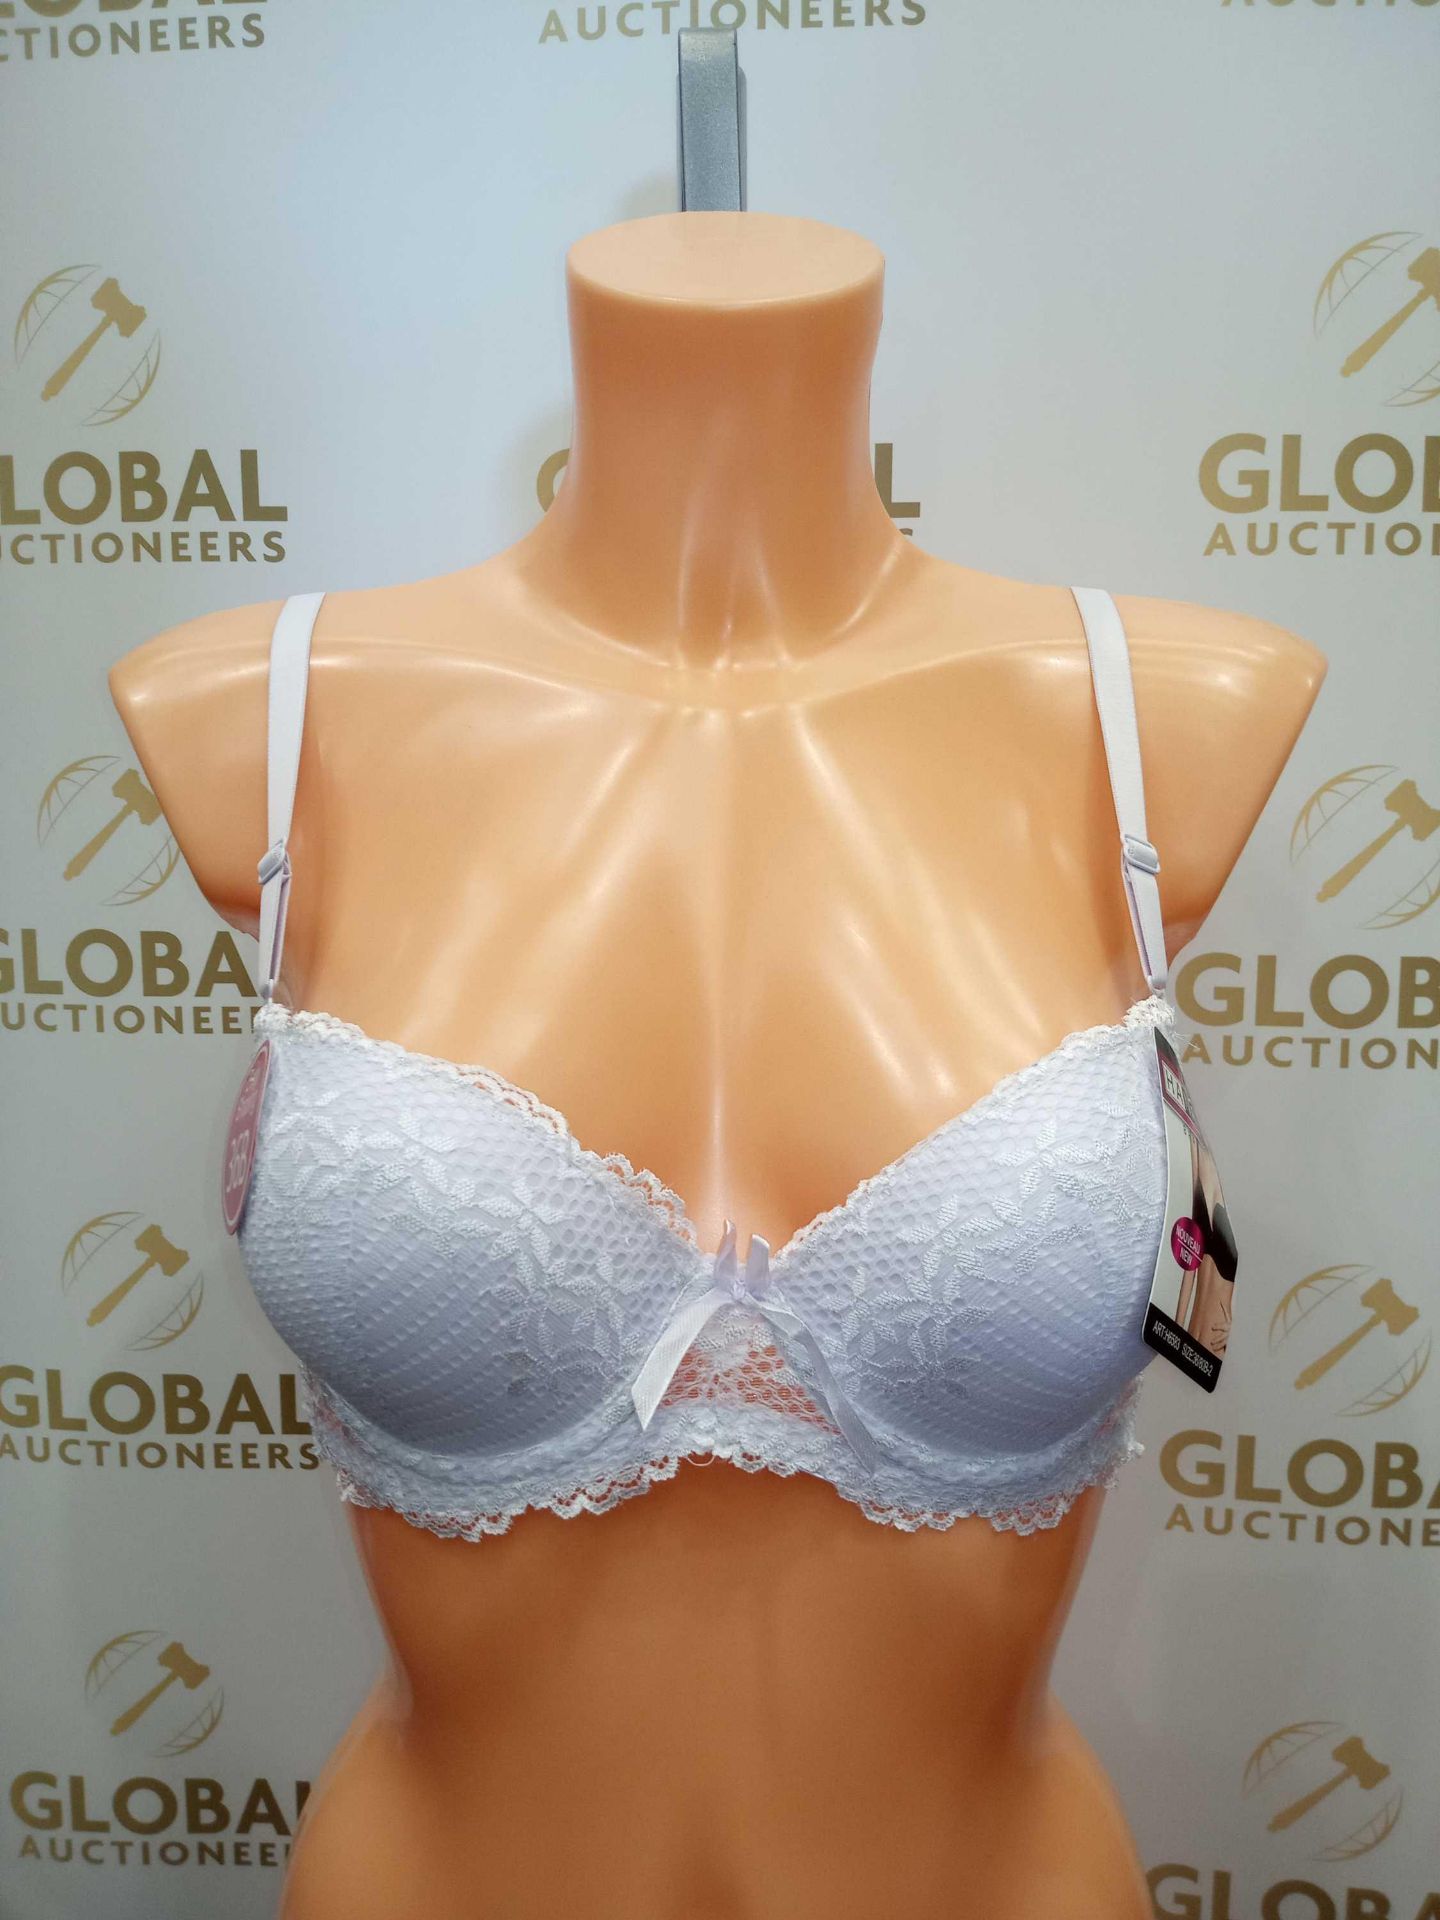 Rrp £270 Lot To Contain 3 Brand New Packs Of 6 Hana Body Shaping Lace Bras (White) - Image 2 of 2